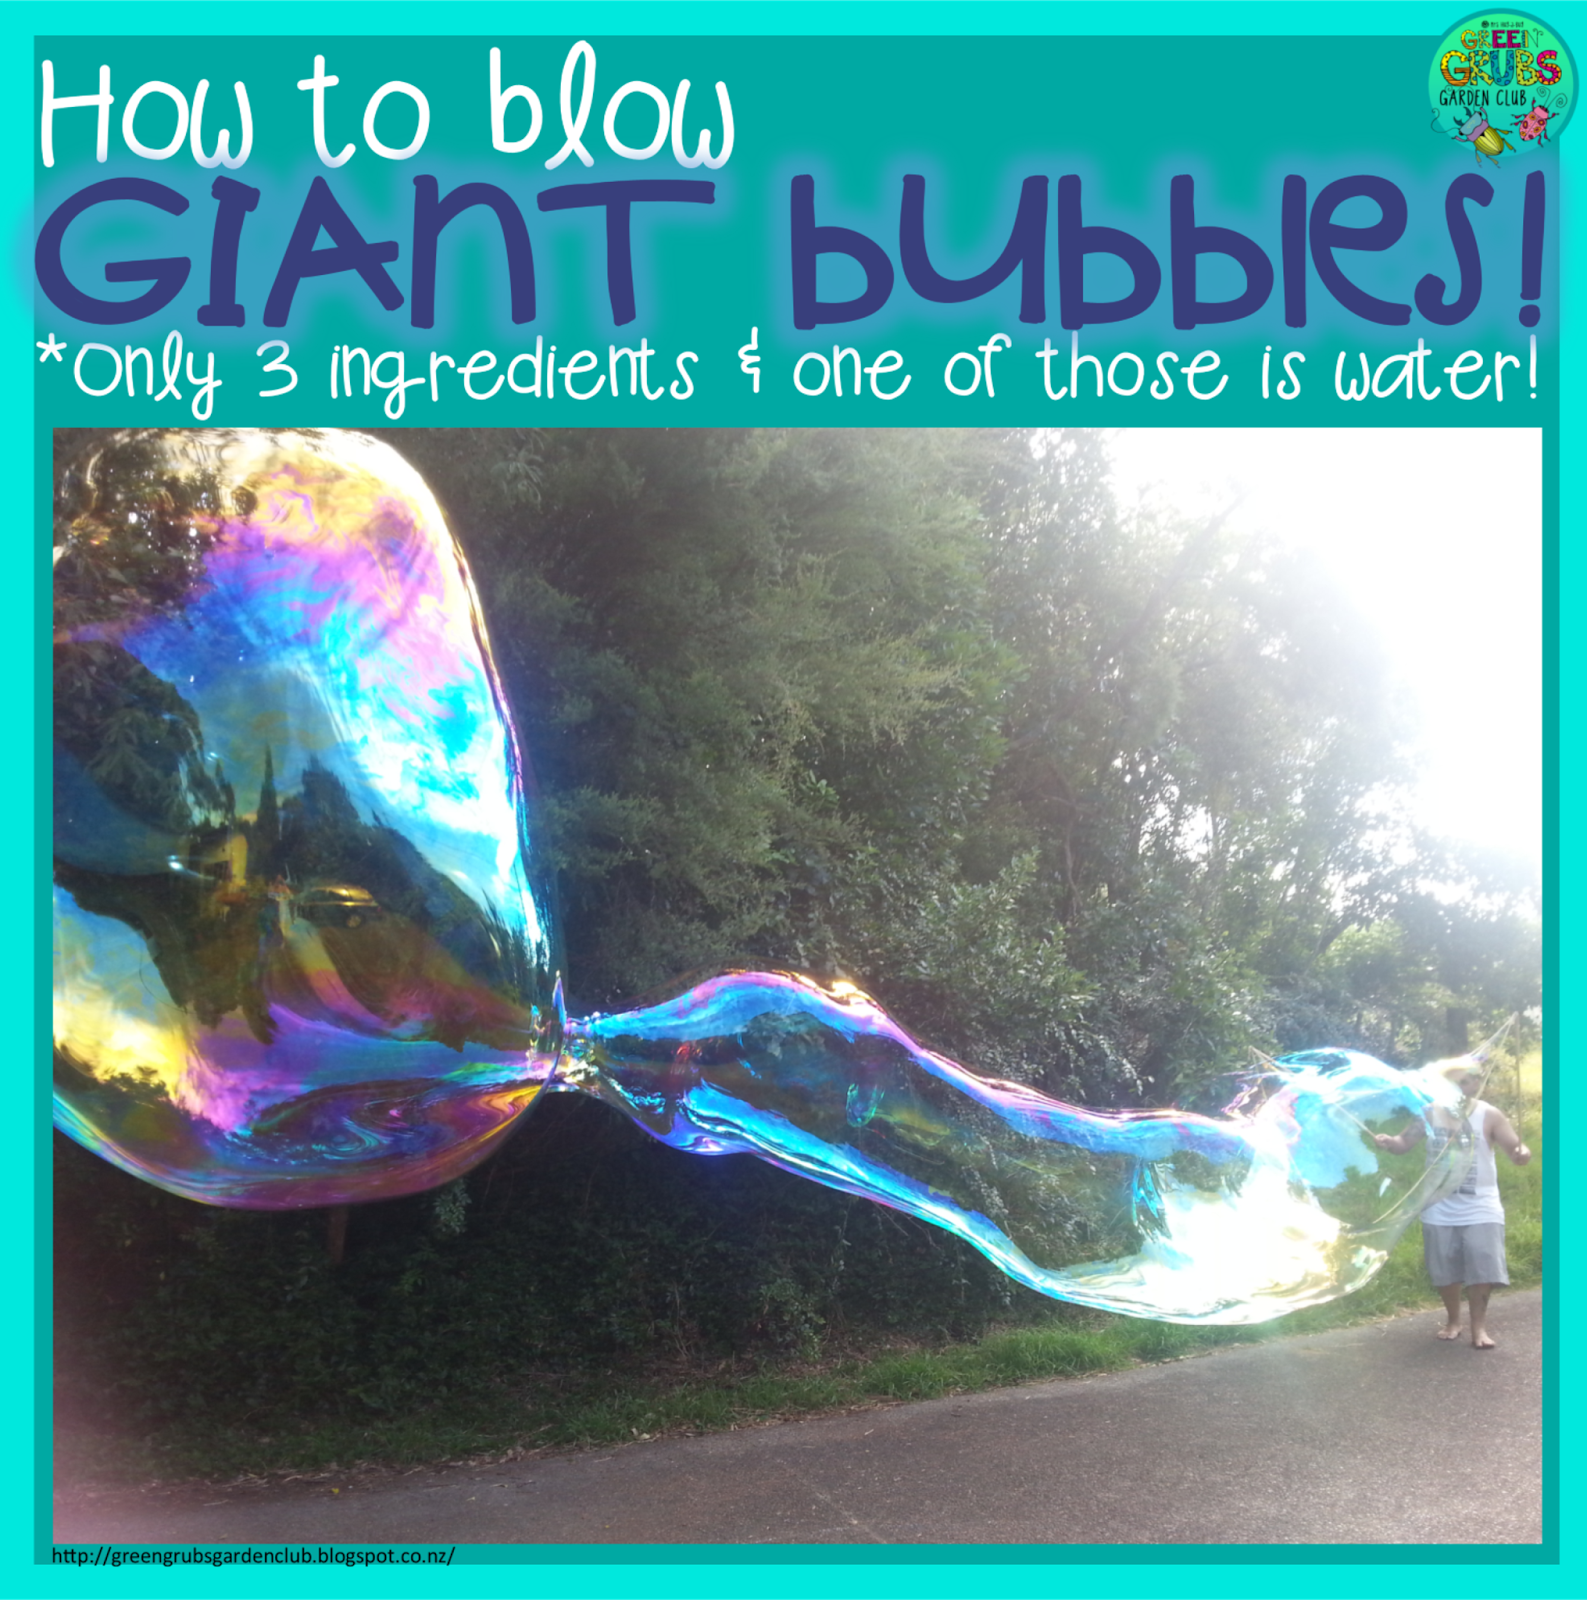 How to blow GIANT bubbles {Top secret bubble blowing recipe + free printable!}